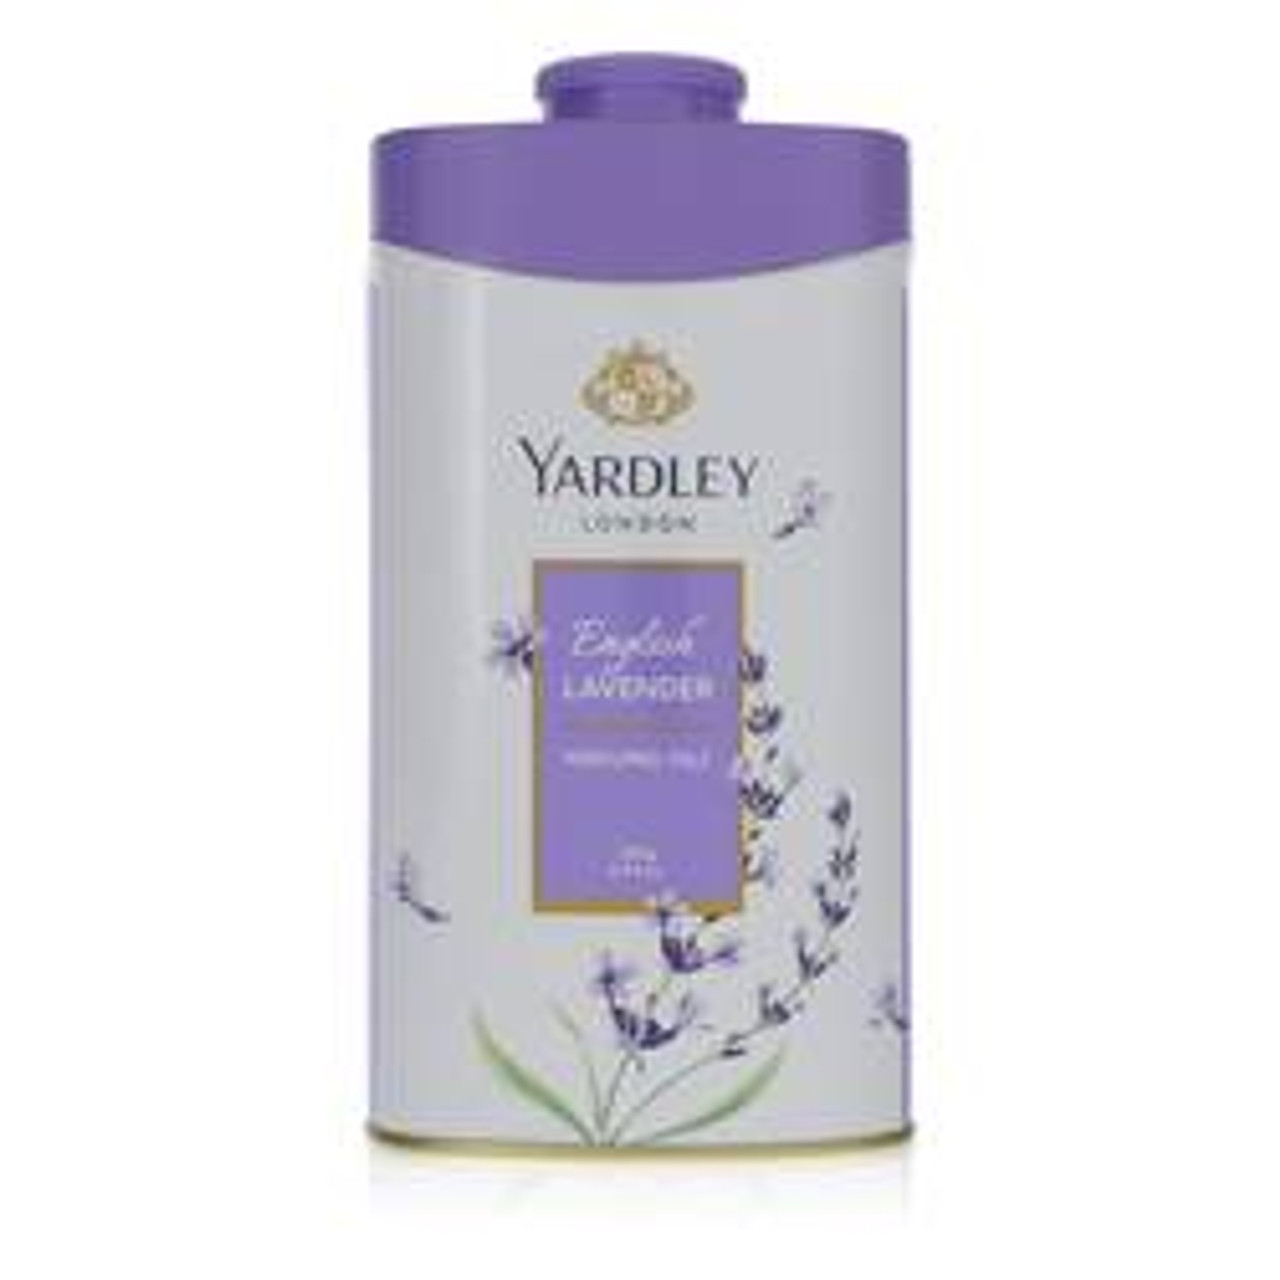 English Lavender Perfume By Yardley London Perfumed Talc 8.8 oz for Women - [From 43.00 - Choose pk Qty ] - *Ships from Miami